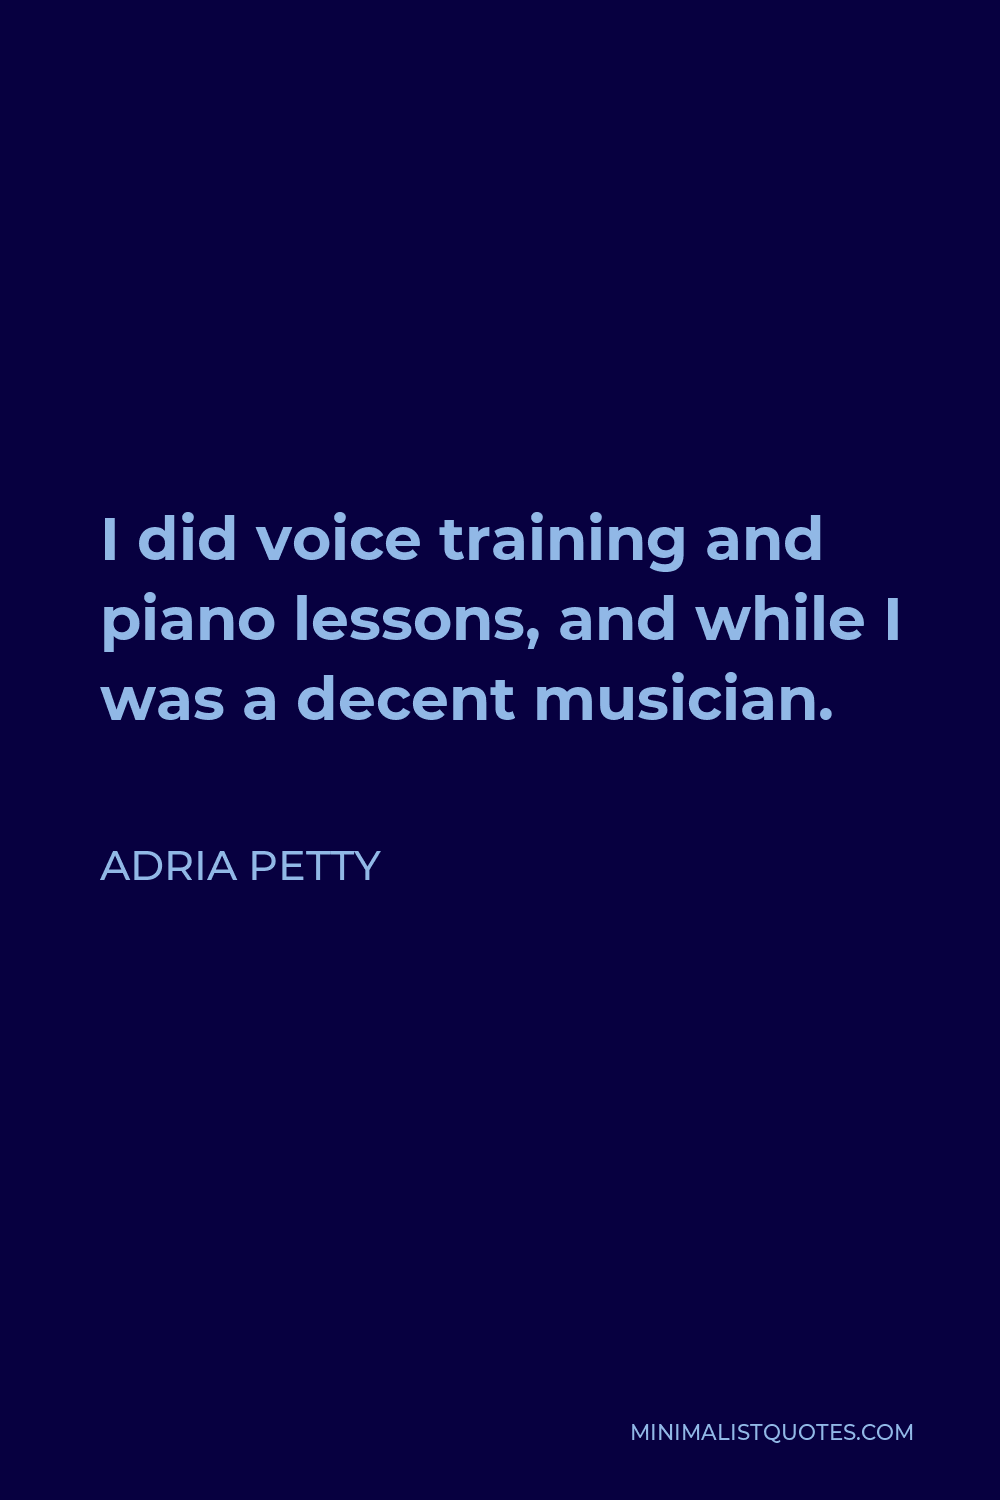 Adria Petty Quote - I did voice training and piano lessons, and while I was a decent musician.